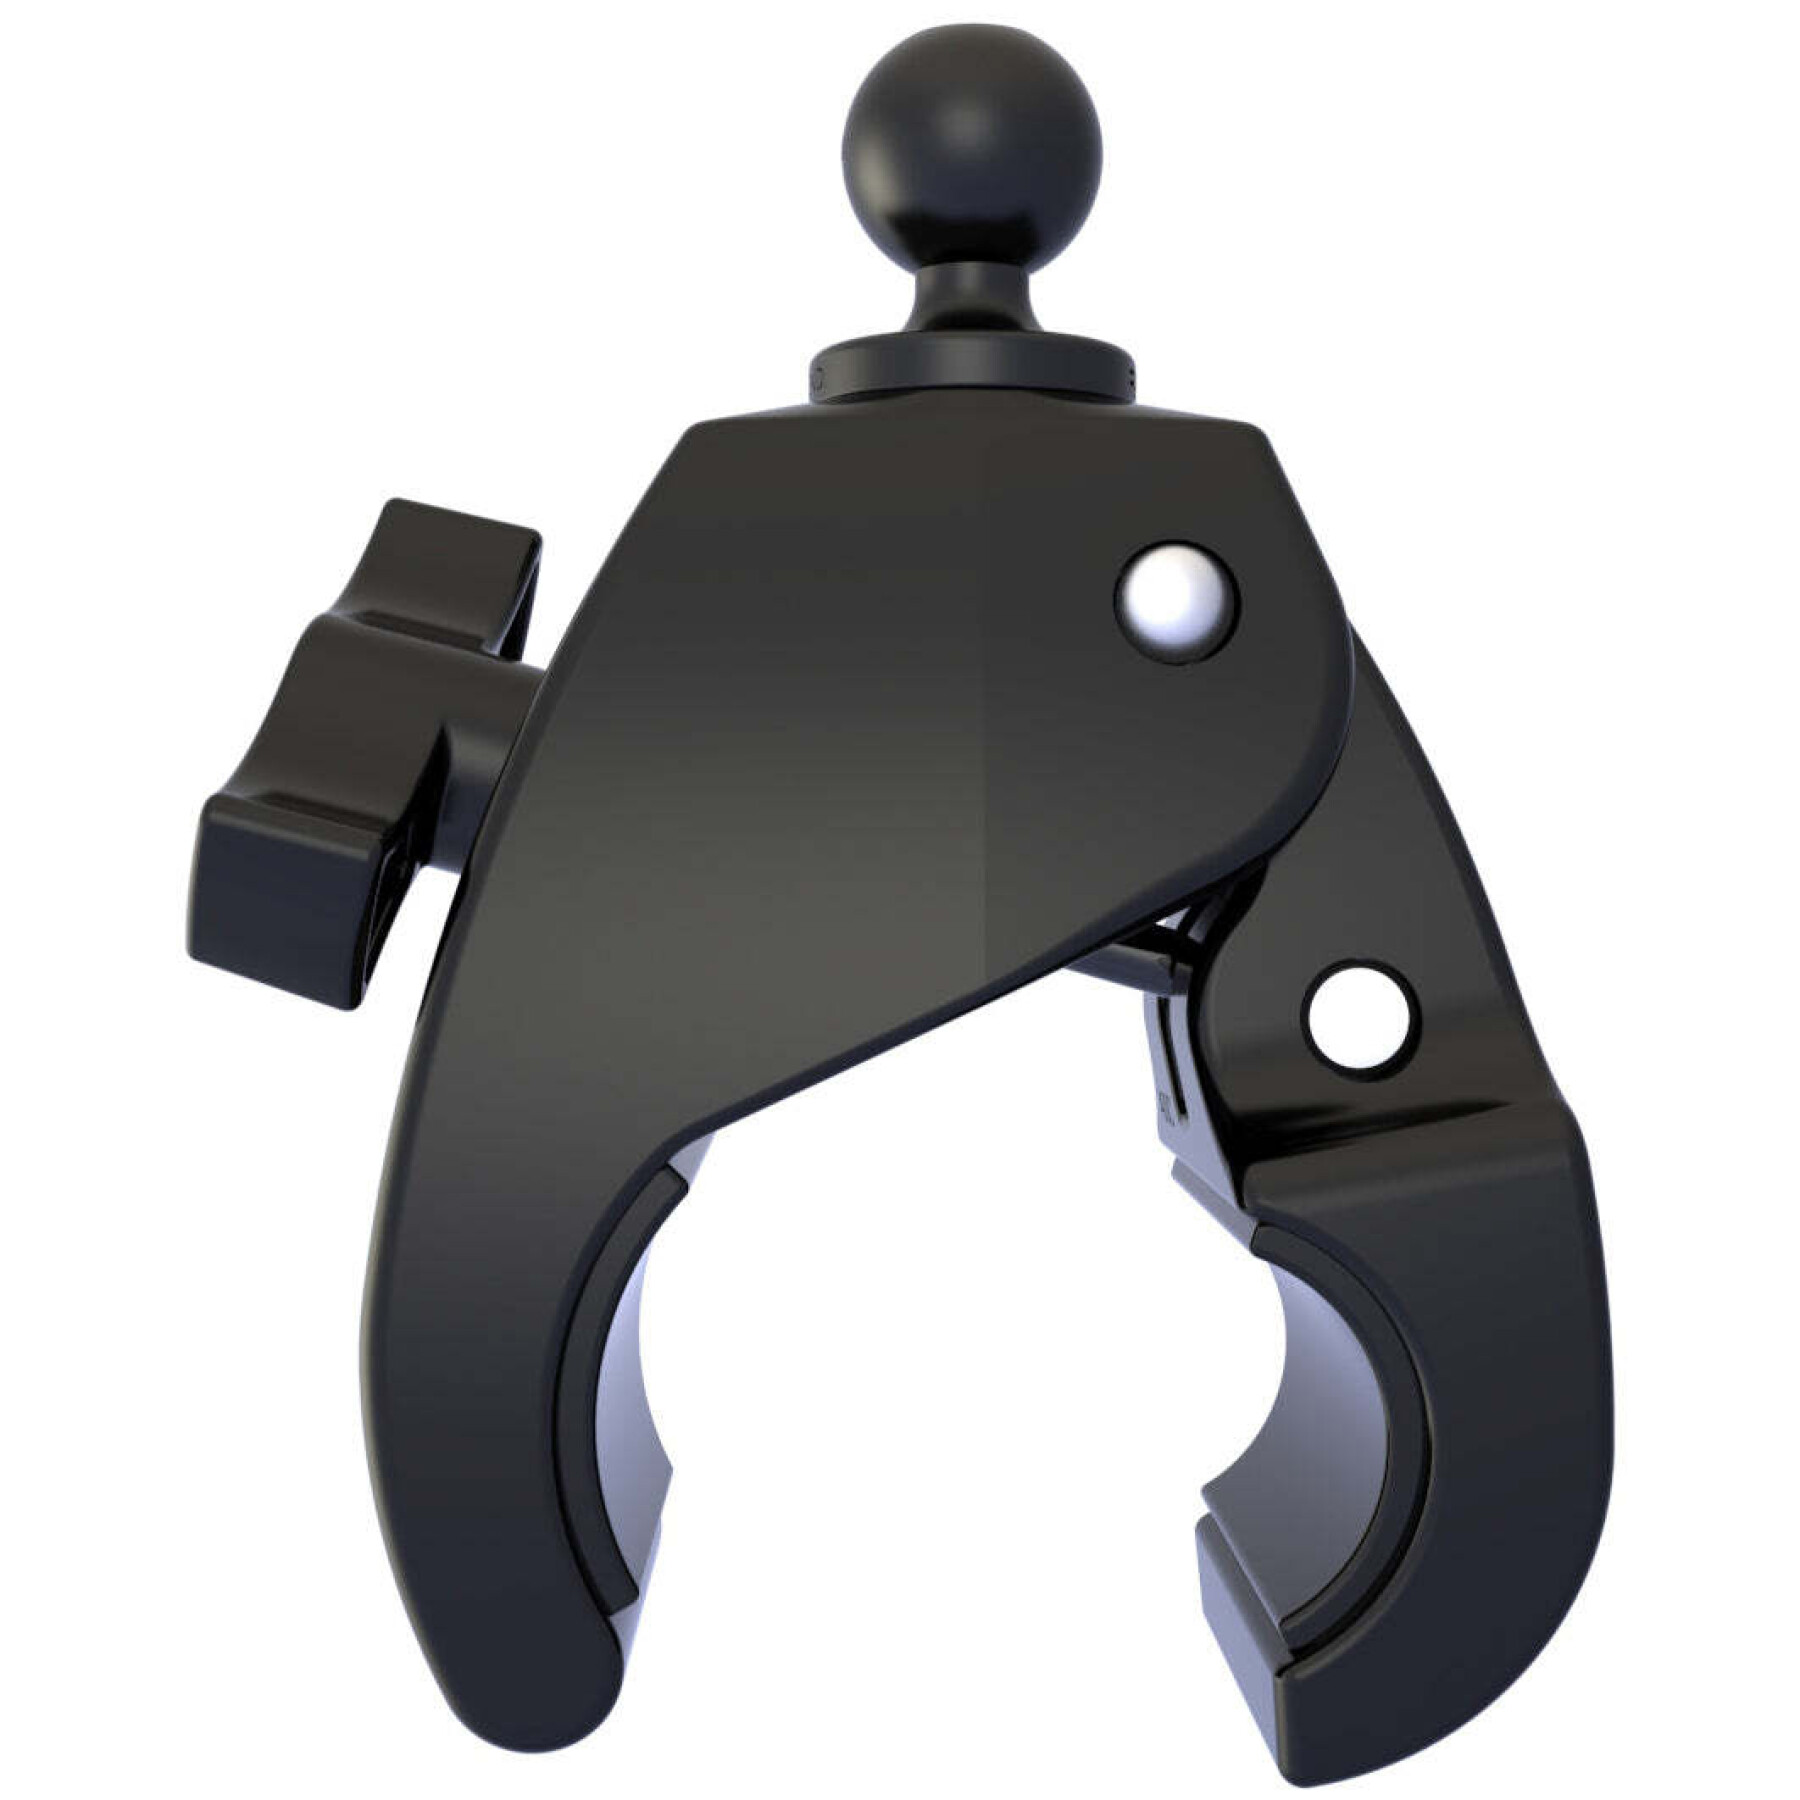 Support gps small clamp with ball b Ram